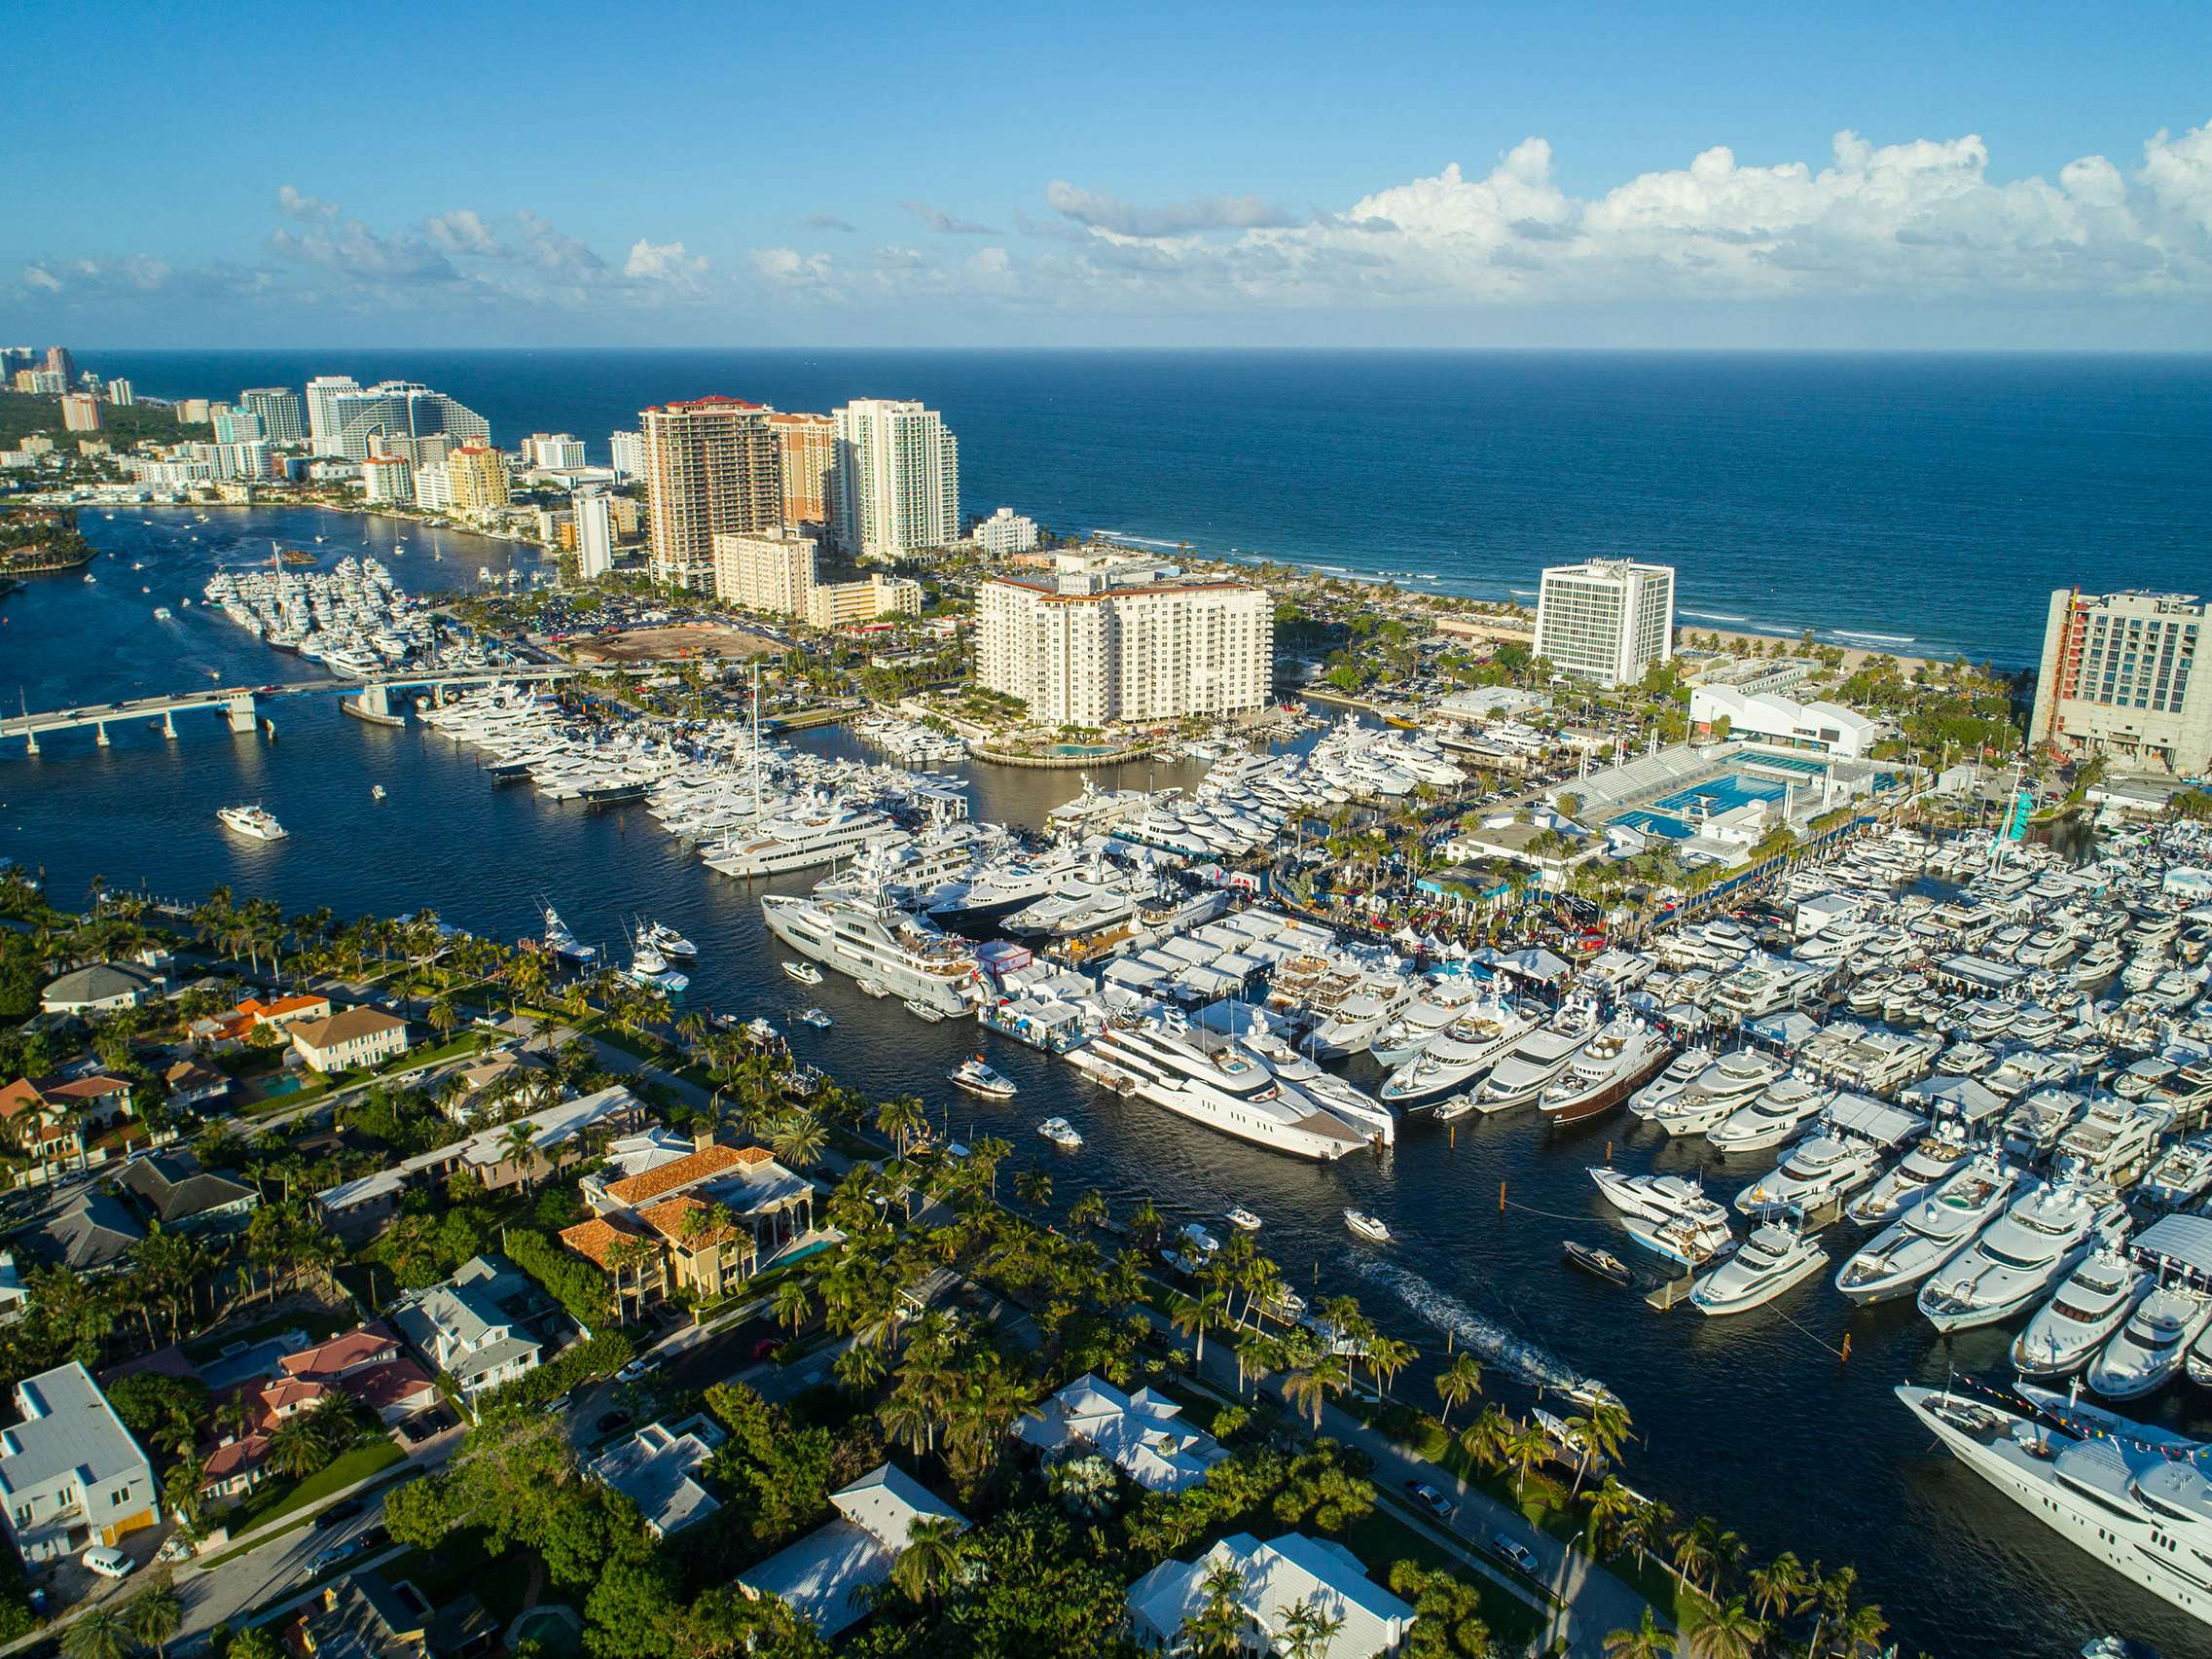 Aerial image of the Fort Lauderdale International Boat Show